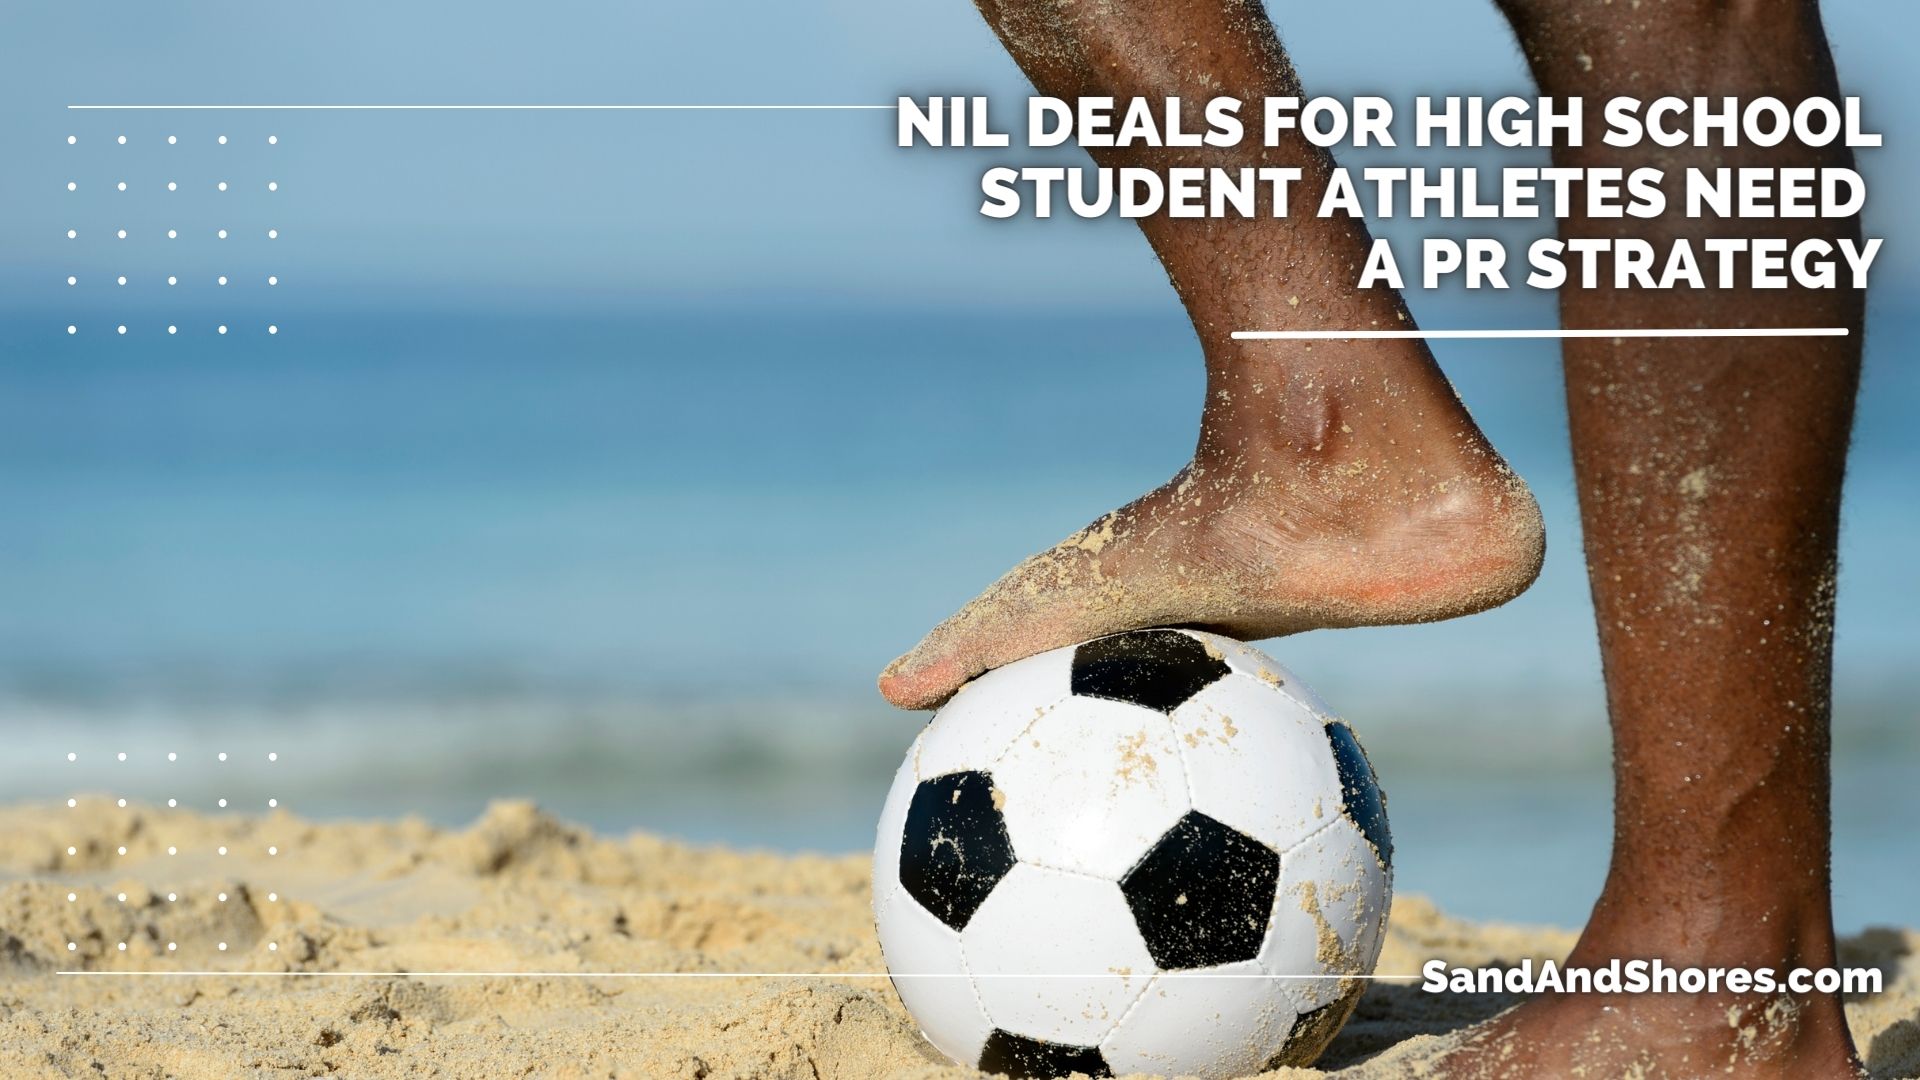 NIL Deals Need PR for High School Students